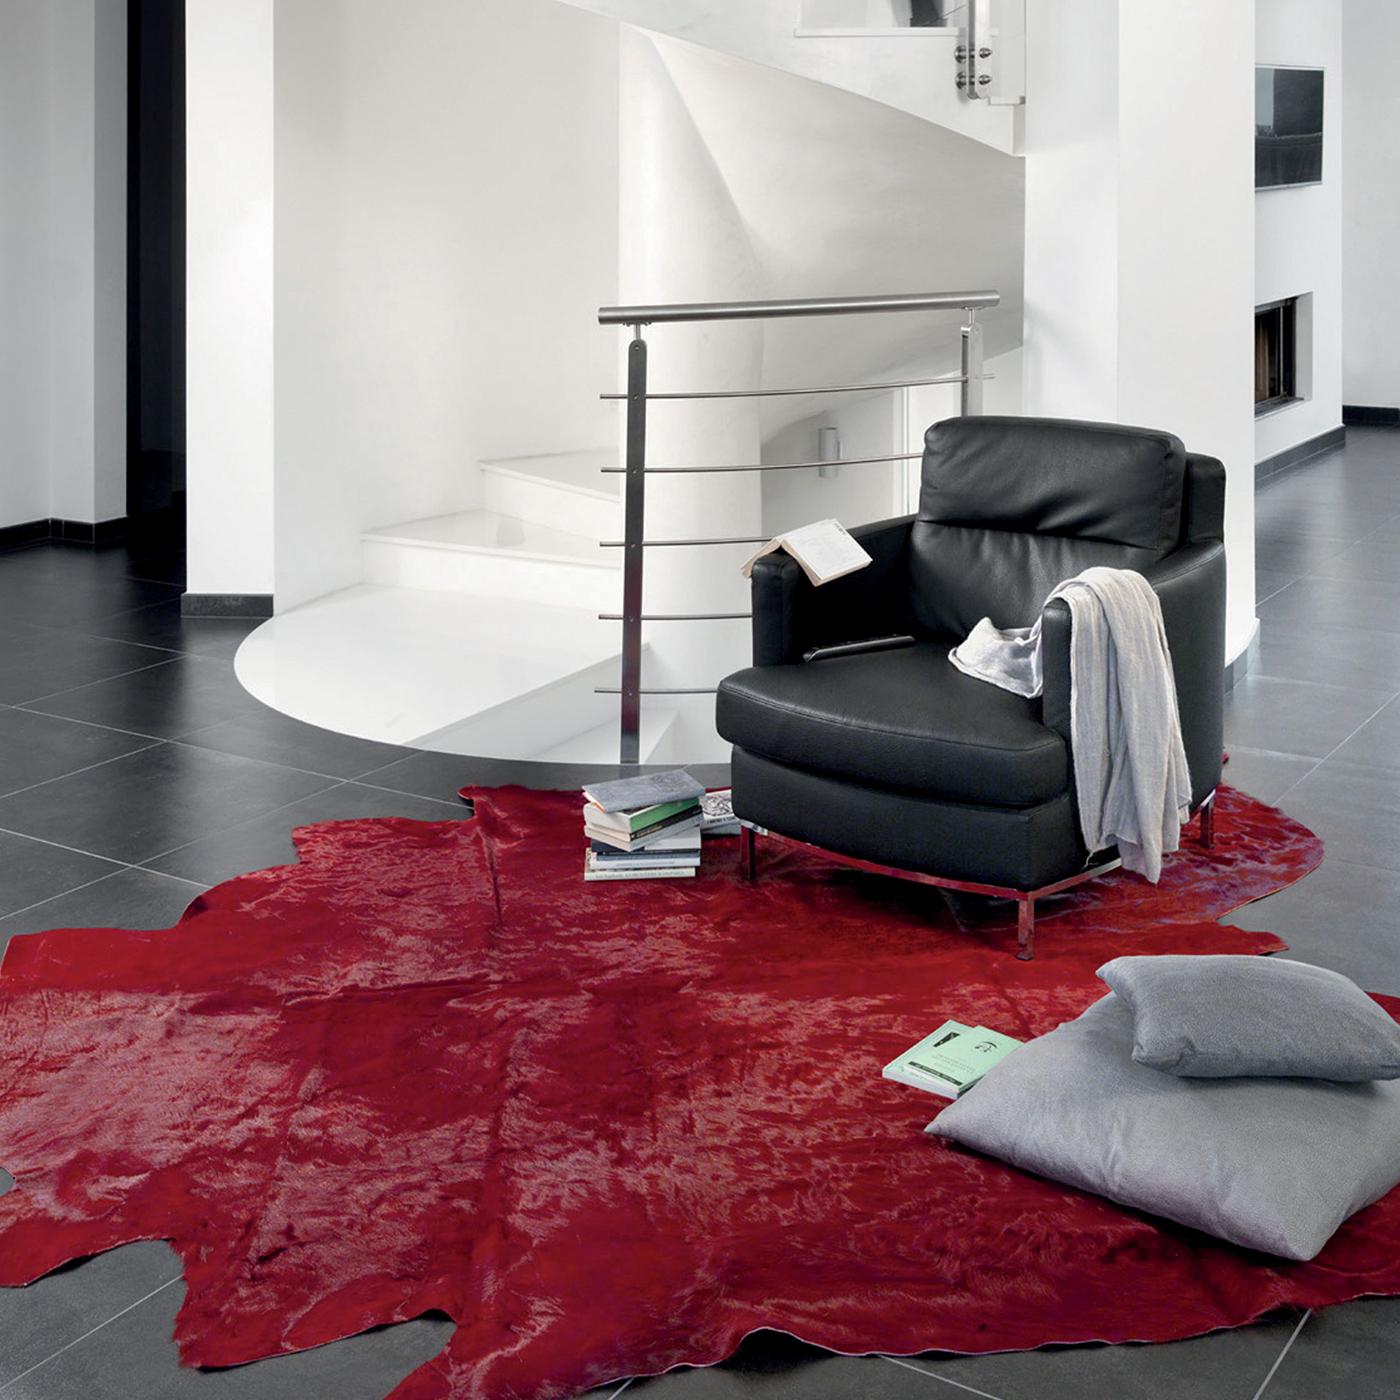 Ideal as a leather rug in the middle of any living space, the Natural Tanner piece will create a warm and cosy environment. As these items are made of natural leather, their sizes and coloring may vary slightly. This red colored 100% cow leather is